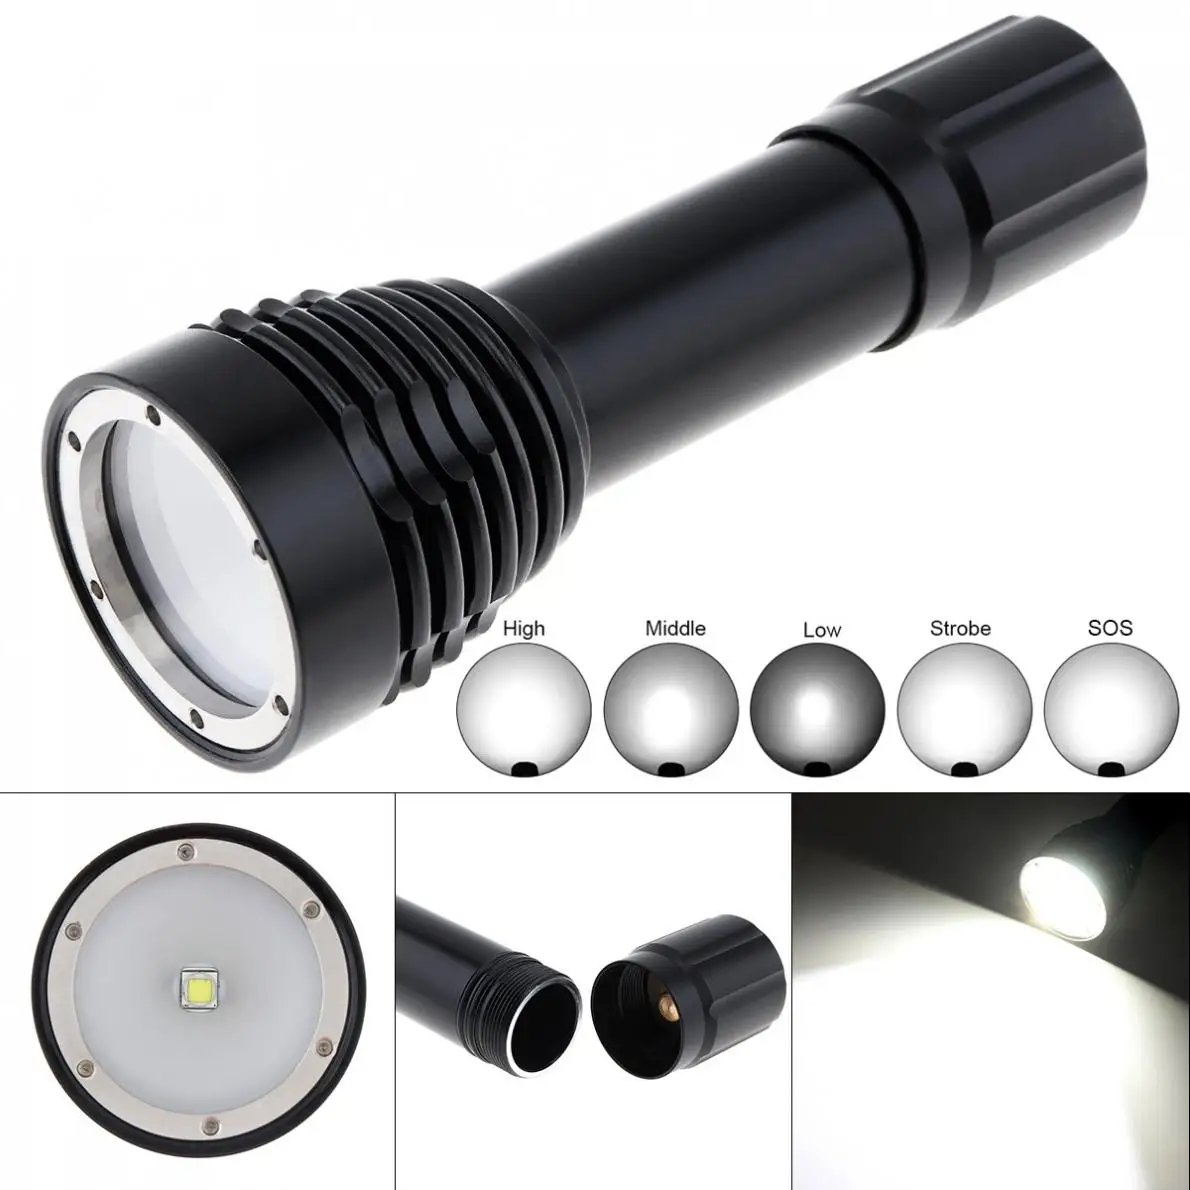 

XM-L2 LED Diving Flashlight Torch 18650 Underwater 100M Powerful Professional Underwater Video Searchlight Scuba Dive Light